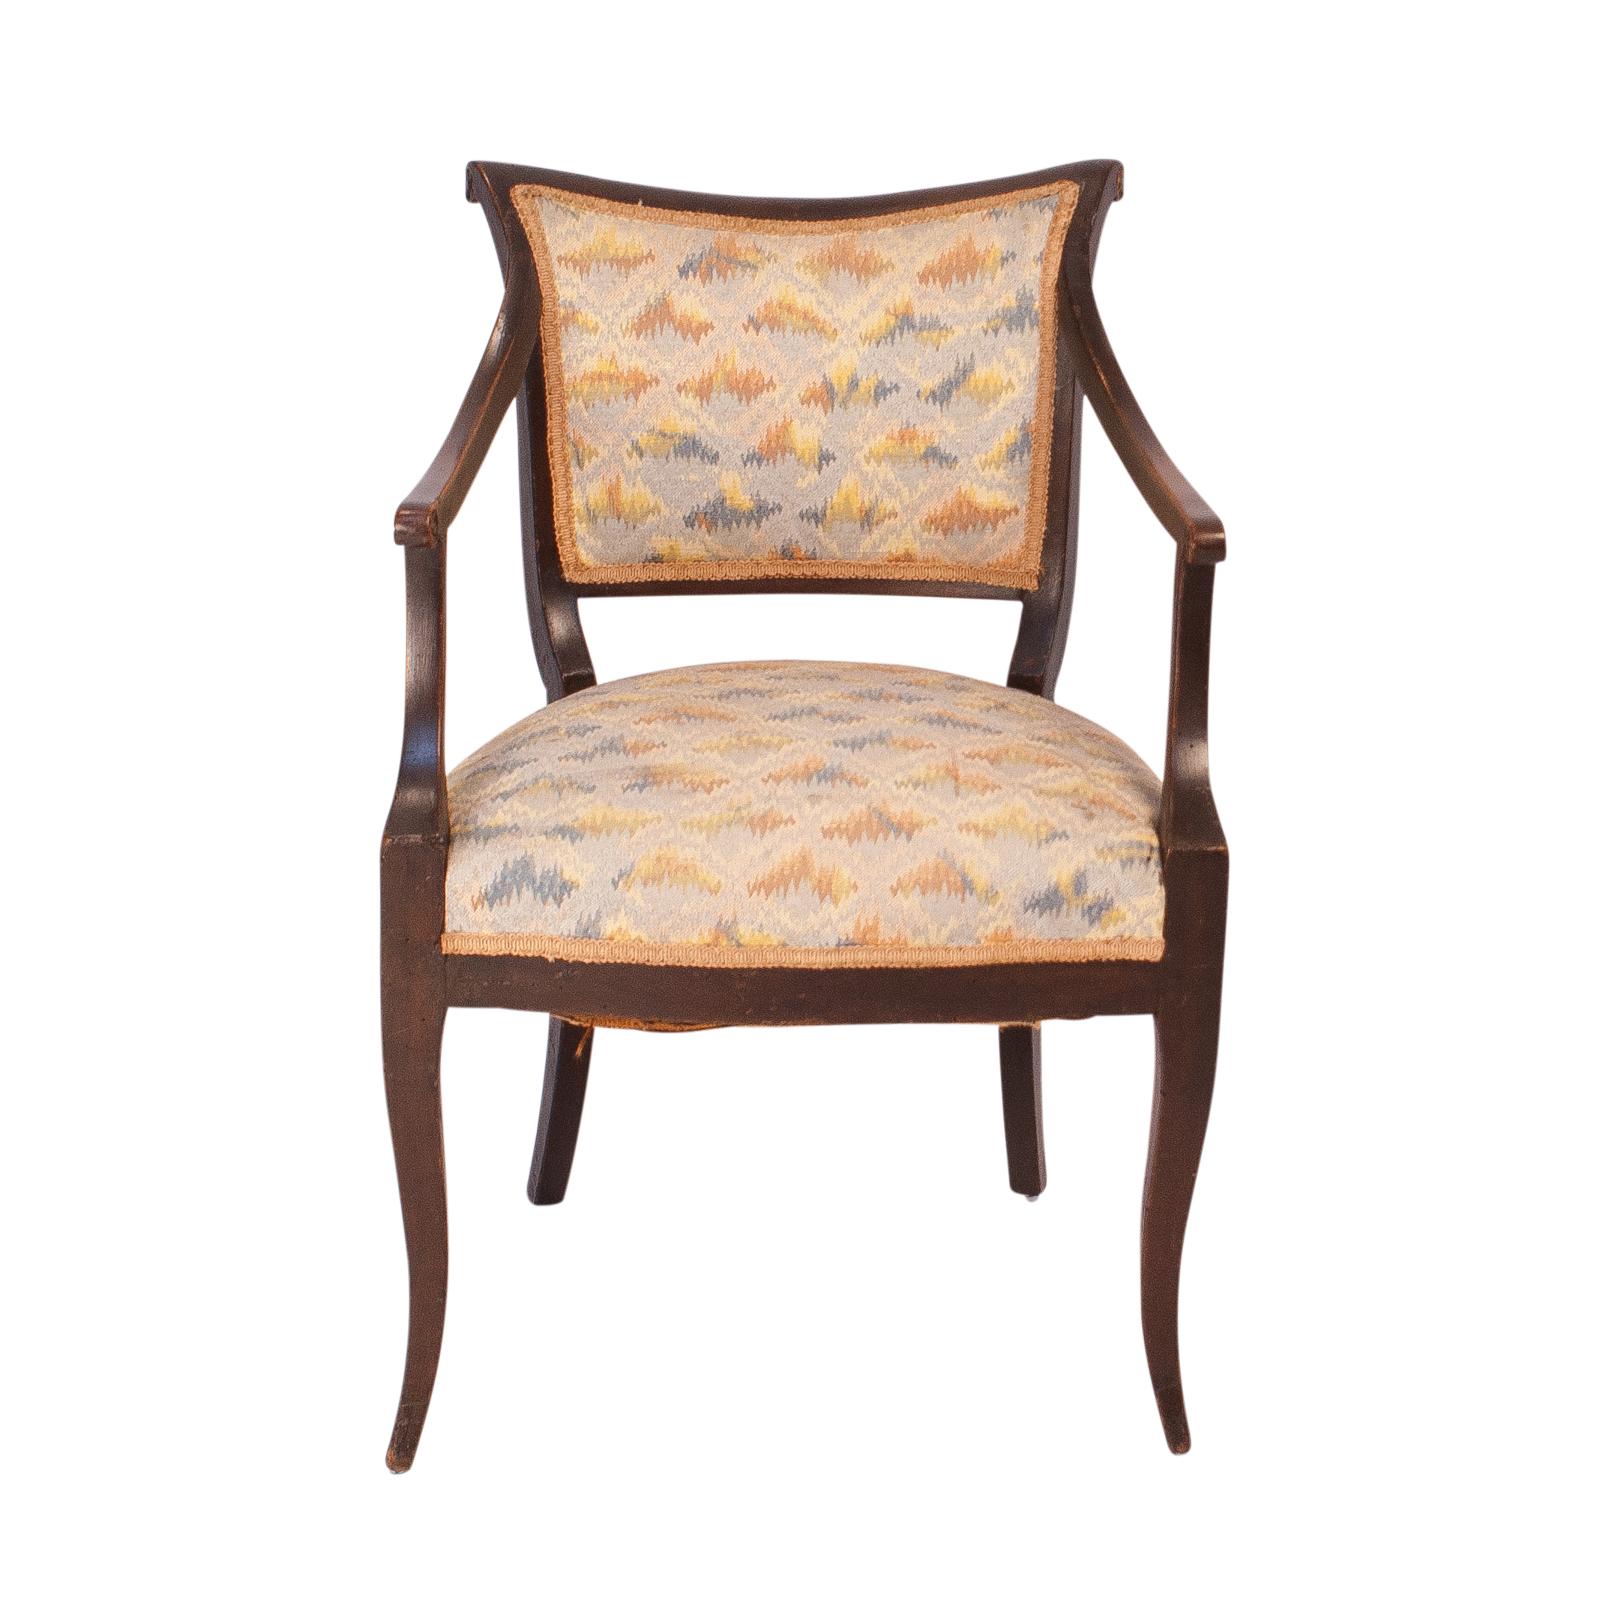 A pair of graceful and unique Italian Directoire armchairs circa 1820 made of walnut with old upholstery. This kind of chair is seen all over Europe early in the 19th century. The Italians added more curves and detail that make the chairs